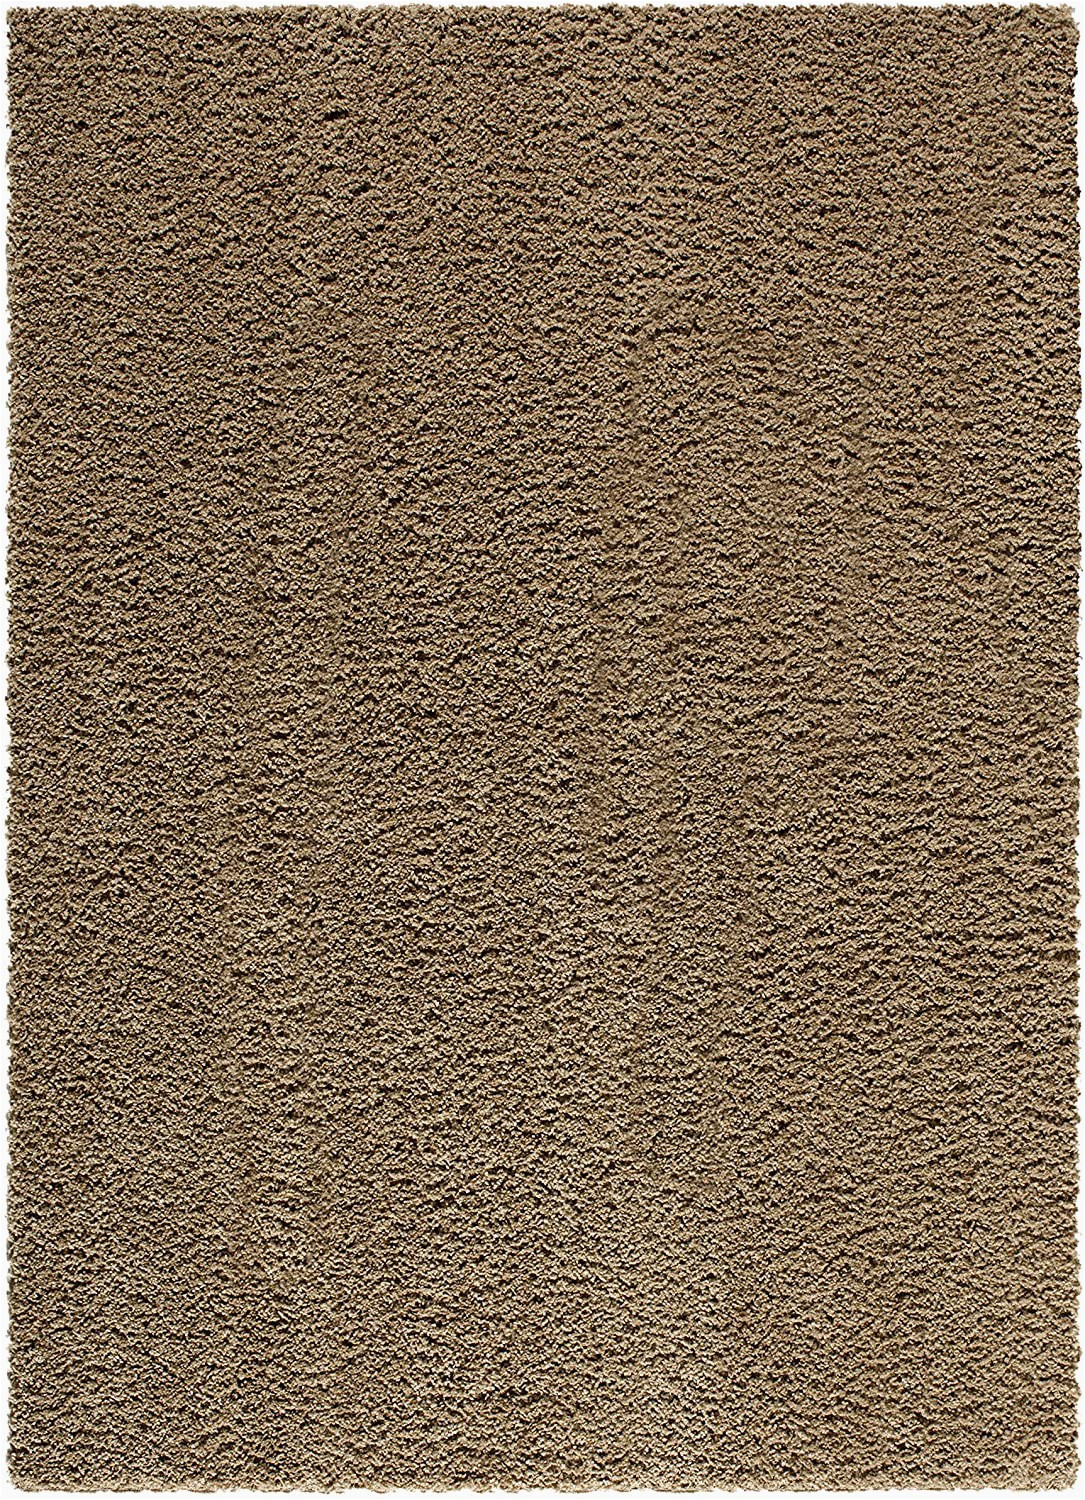 Large Non Slip area Rugs area Rugs Maples Rugs [made In Usa][catriona] 5 X 7 Non Slip Padded Rug for Living Room Bedroom and Dining Room Maverick Brown